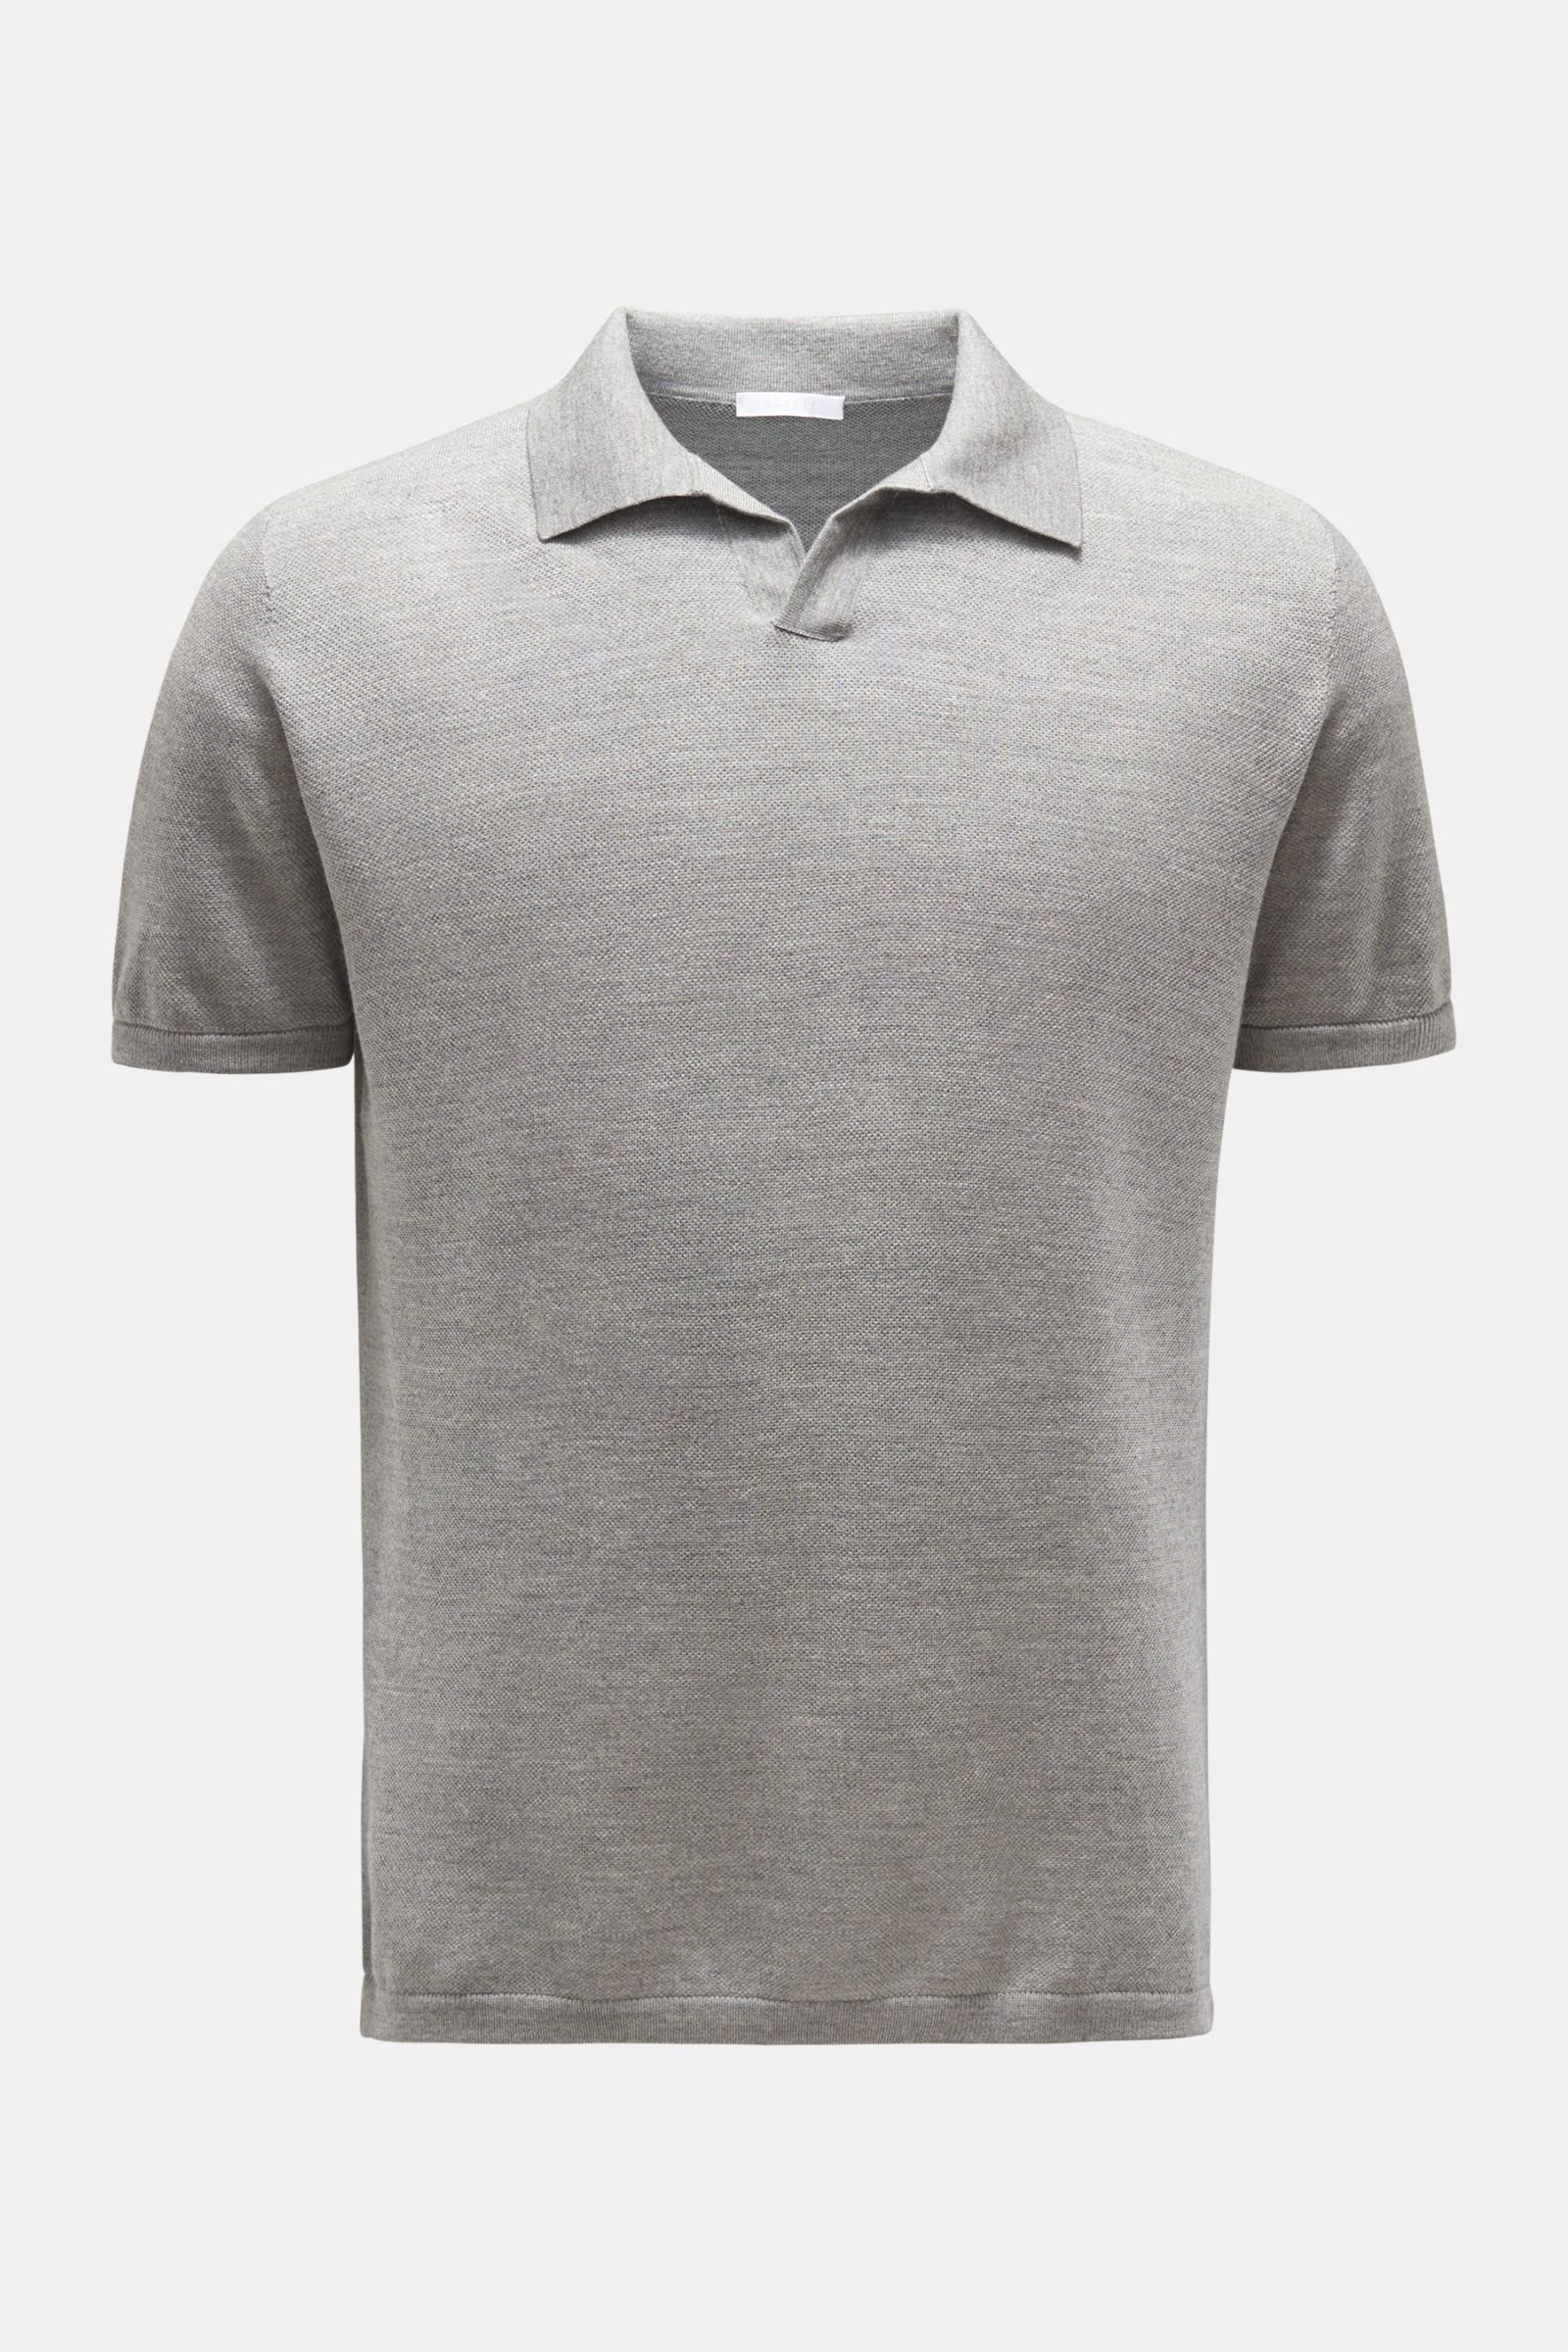 Short sleeve knit polo 'The Ultimate Polo' grey